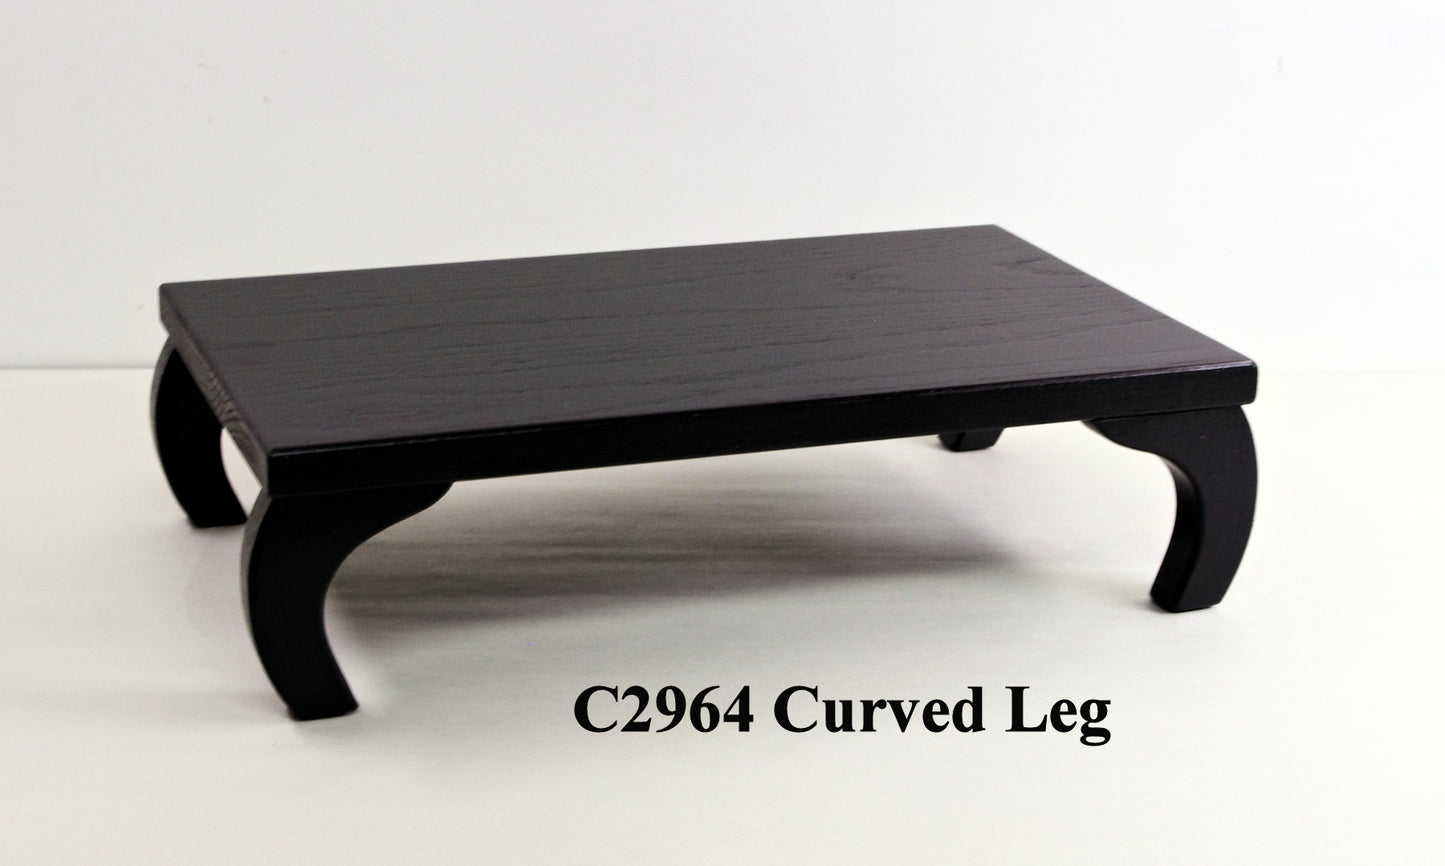 Bonsai Stand Curved Leg C2964 Made to Order 32" Length